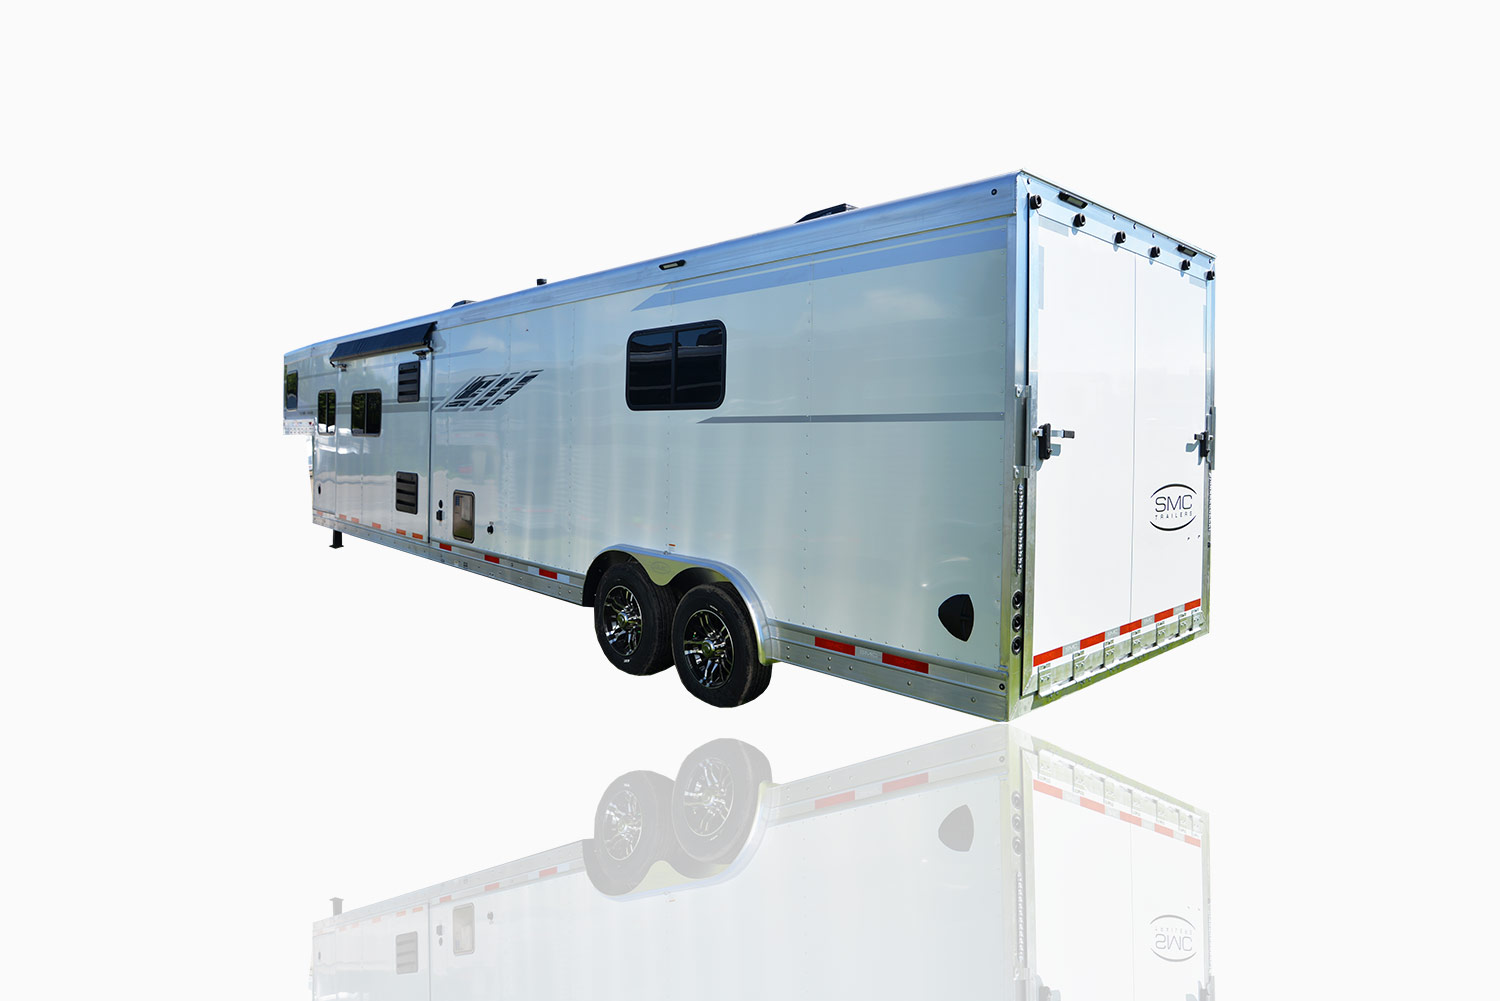 Smc Horse Trailers Proudly Made In